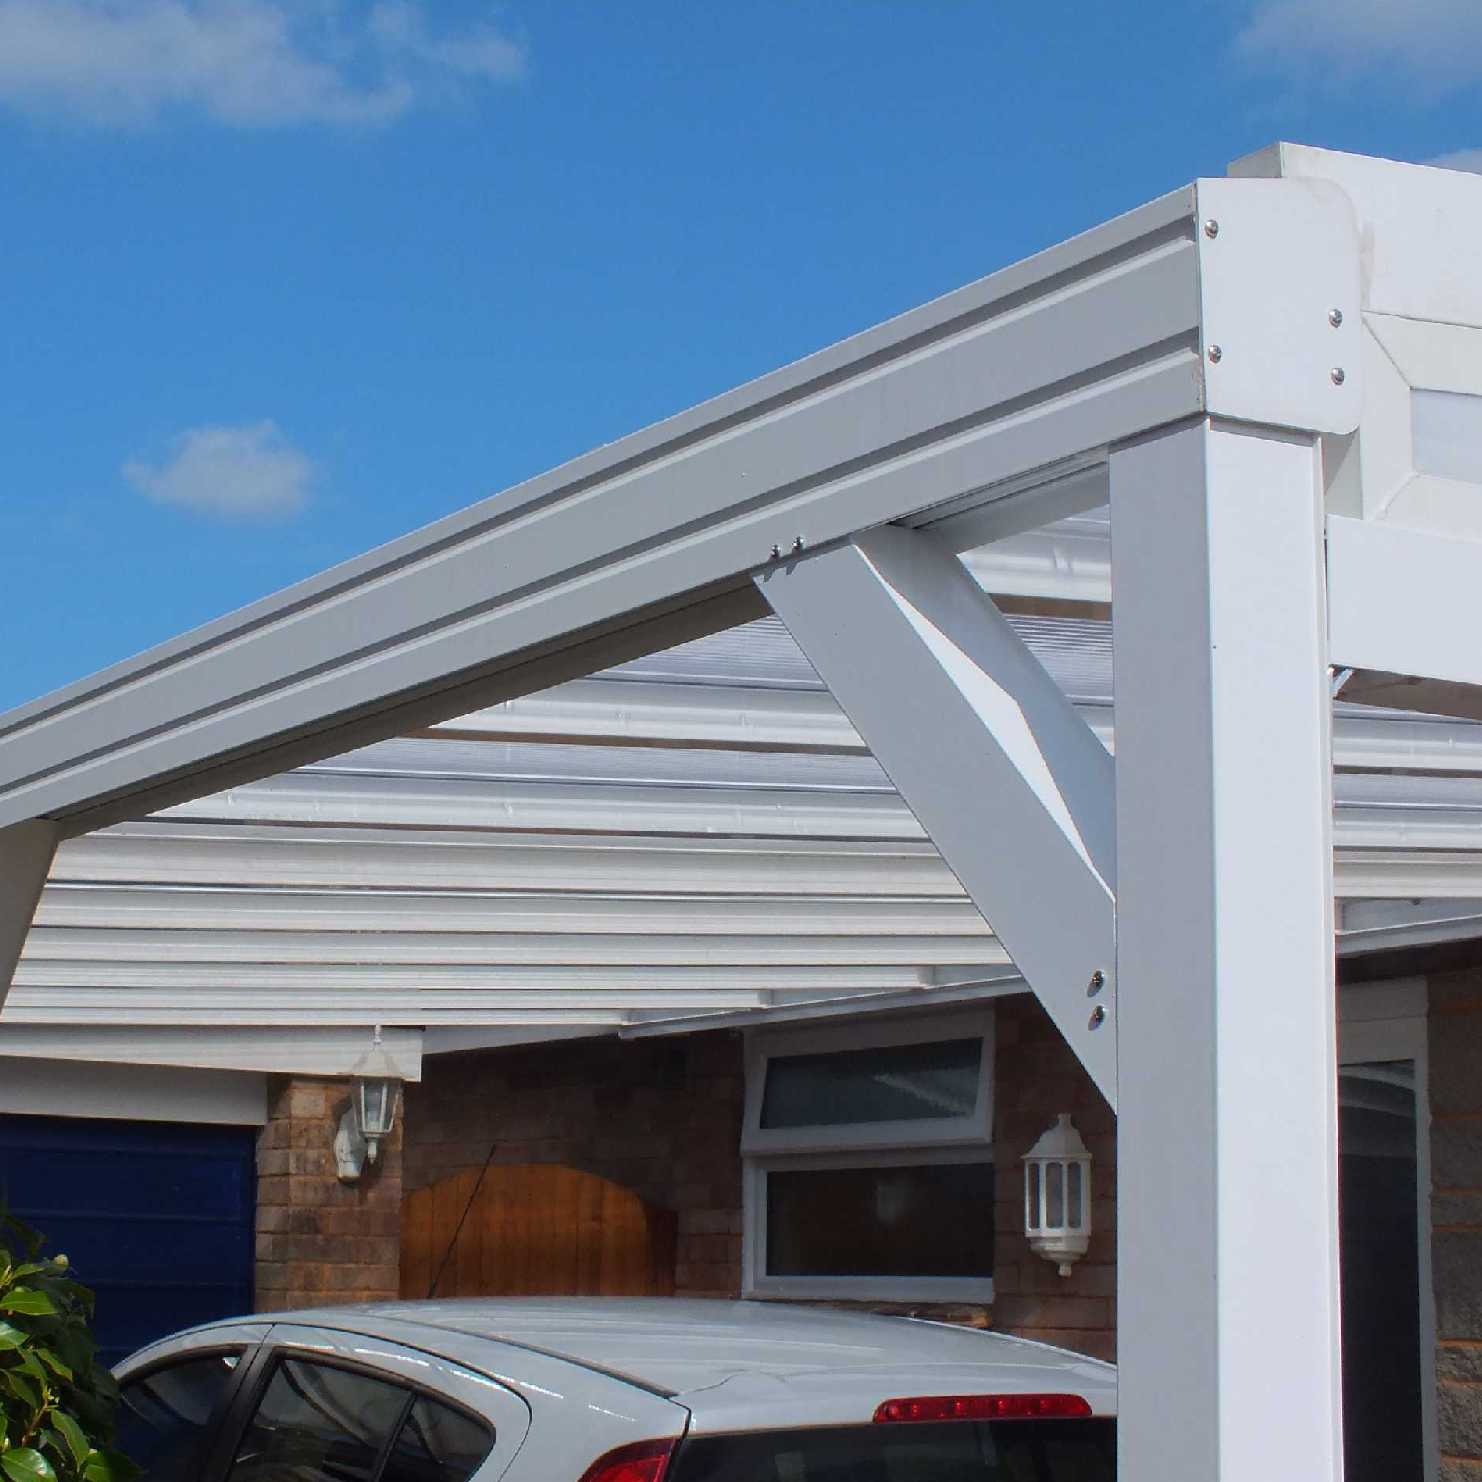 Buy Omega Smart Lean-To Canopy, White with 16mm Polycarbonate Glazing - 12.0m (W) x 4.5m (P), (5) Supporting Posts online today